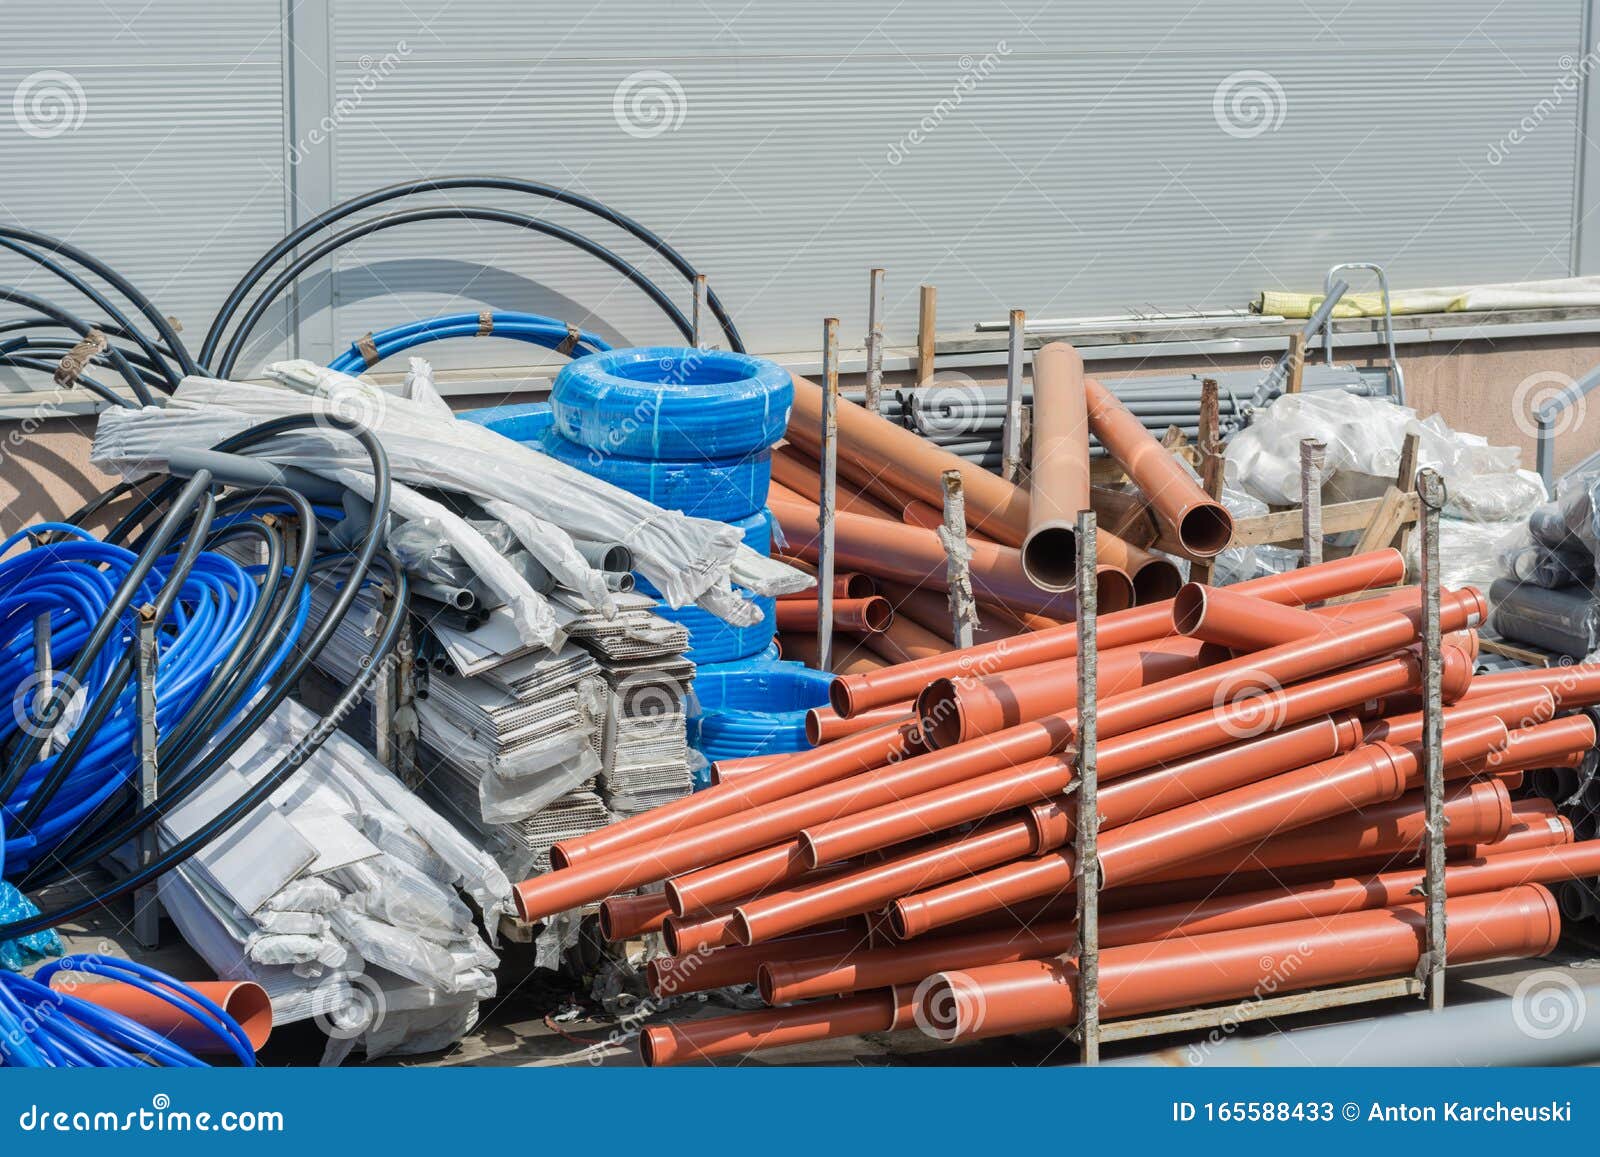 building materials in the yard. plastic pipes, hoses, plastic, plastic film, cables, plastic panels in the package, corrugation